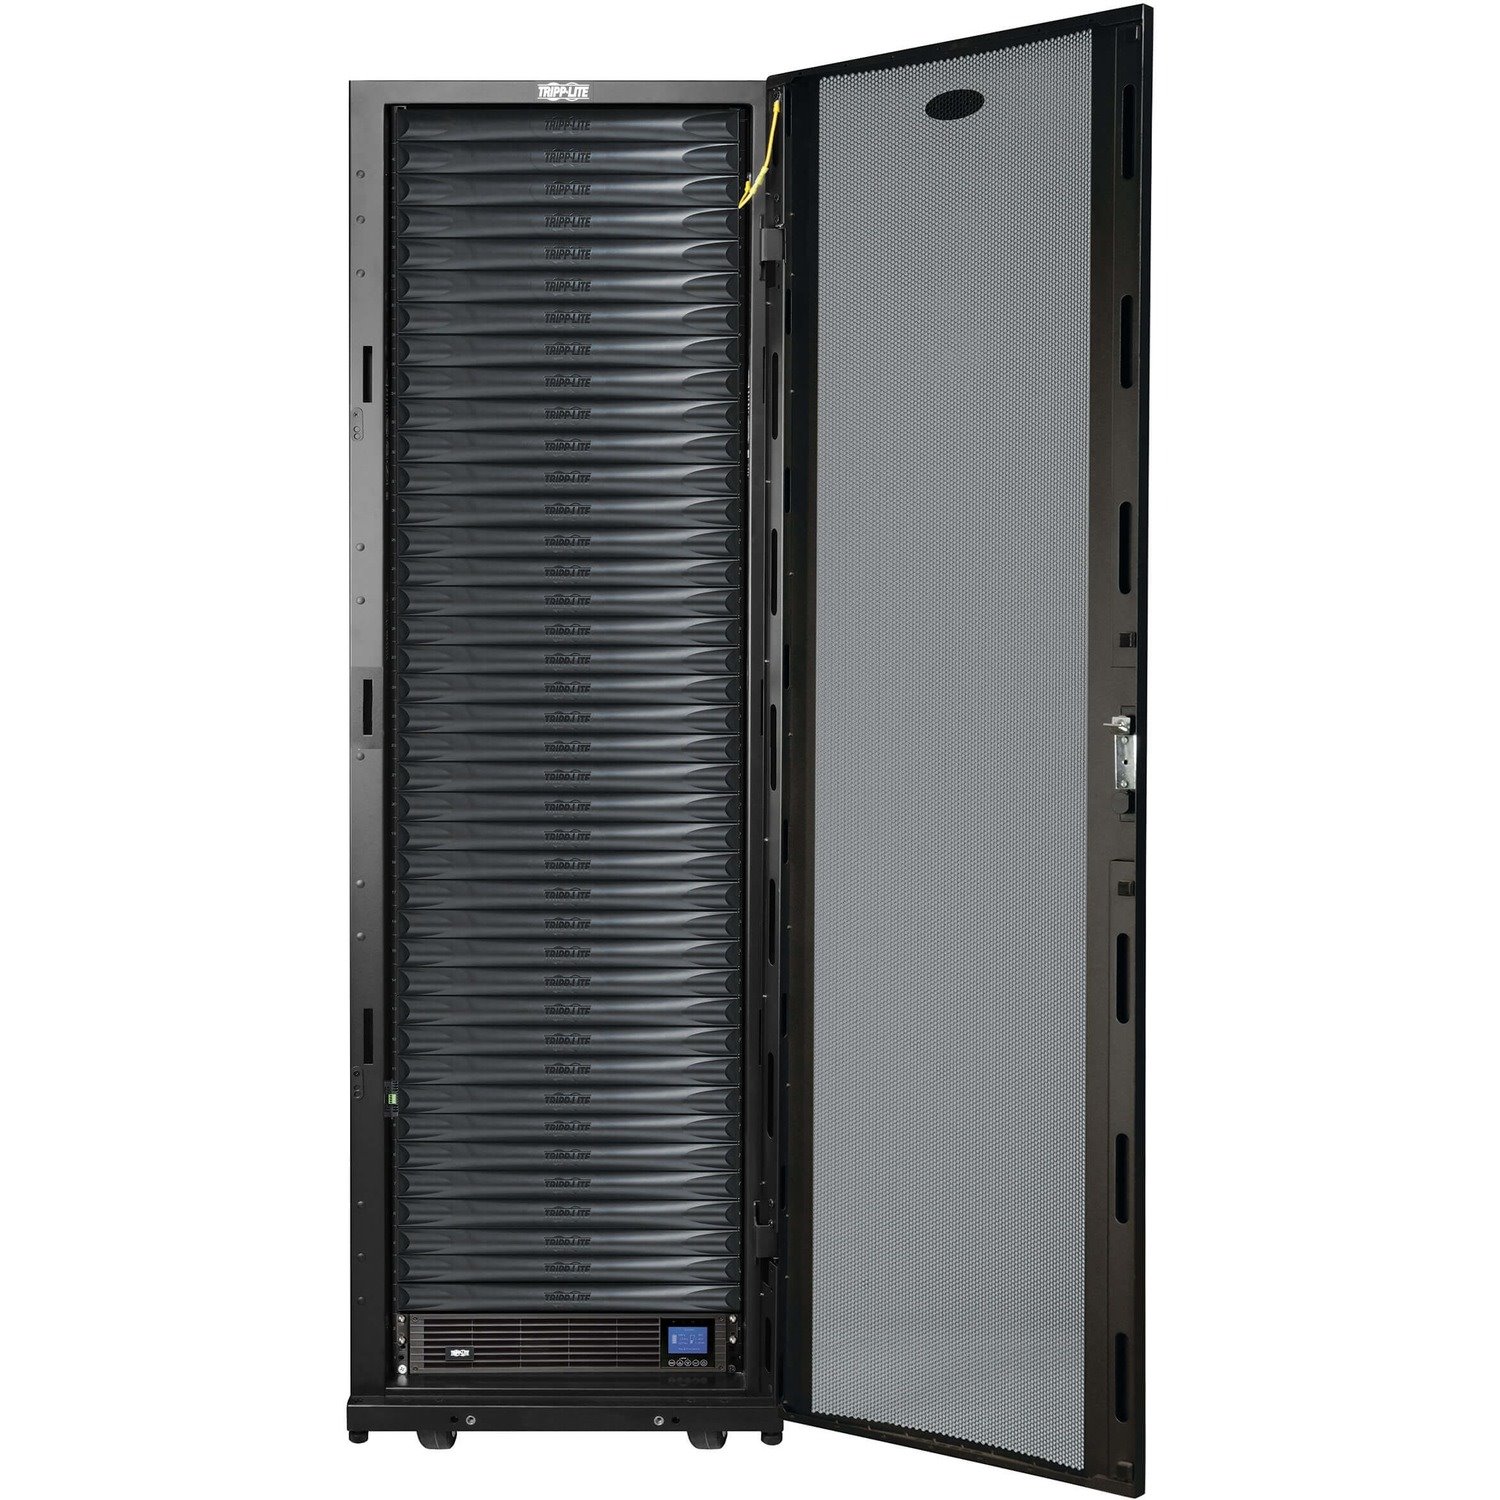 Tripp Lite by Eaton EdgeReady&trade; Micro Data Center - 40U, 3 kVA UPS, Network Management and PDU, 230V Assembled/Tested Unit